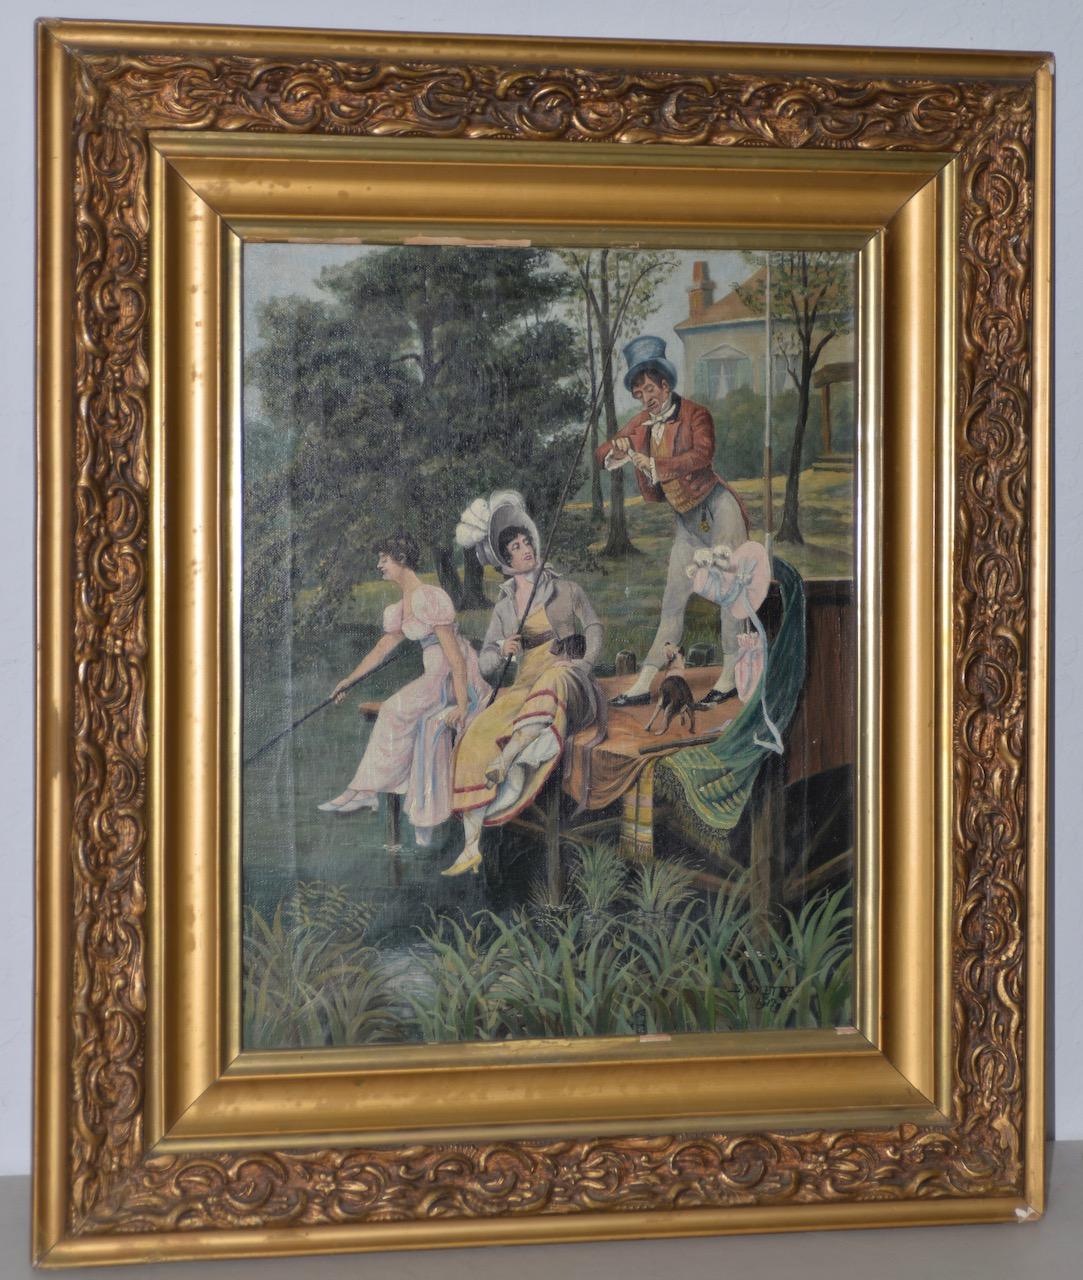 Early 20th Century Oil Painting "Fishing" by E. Smette c.1917